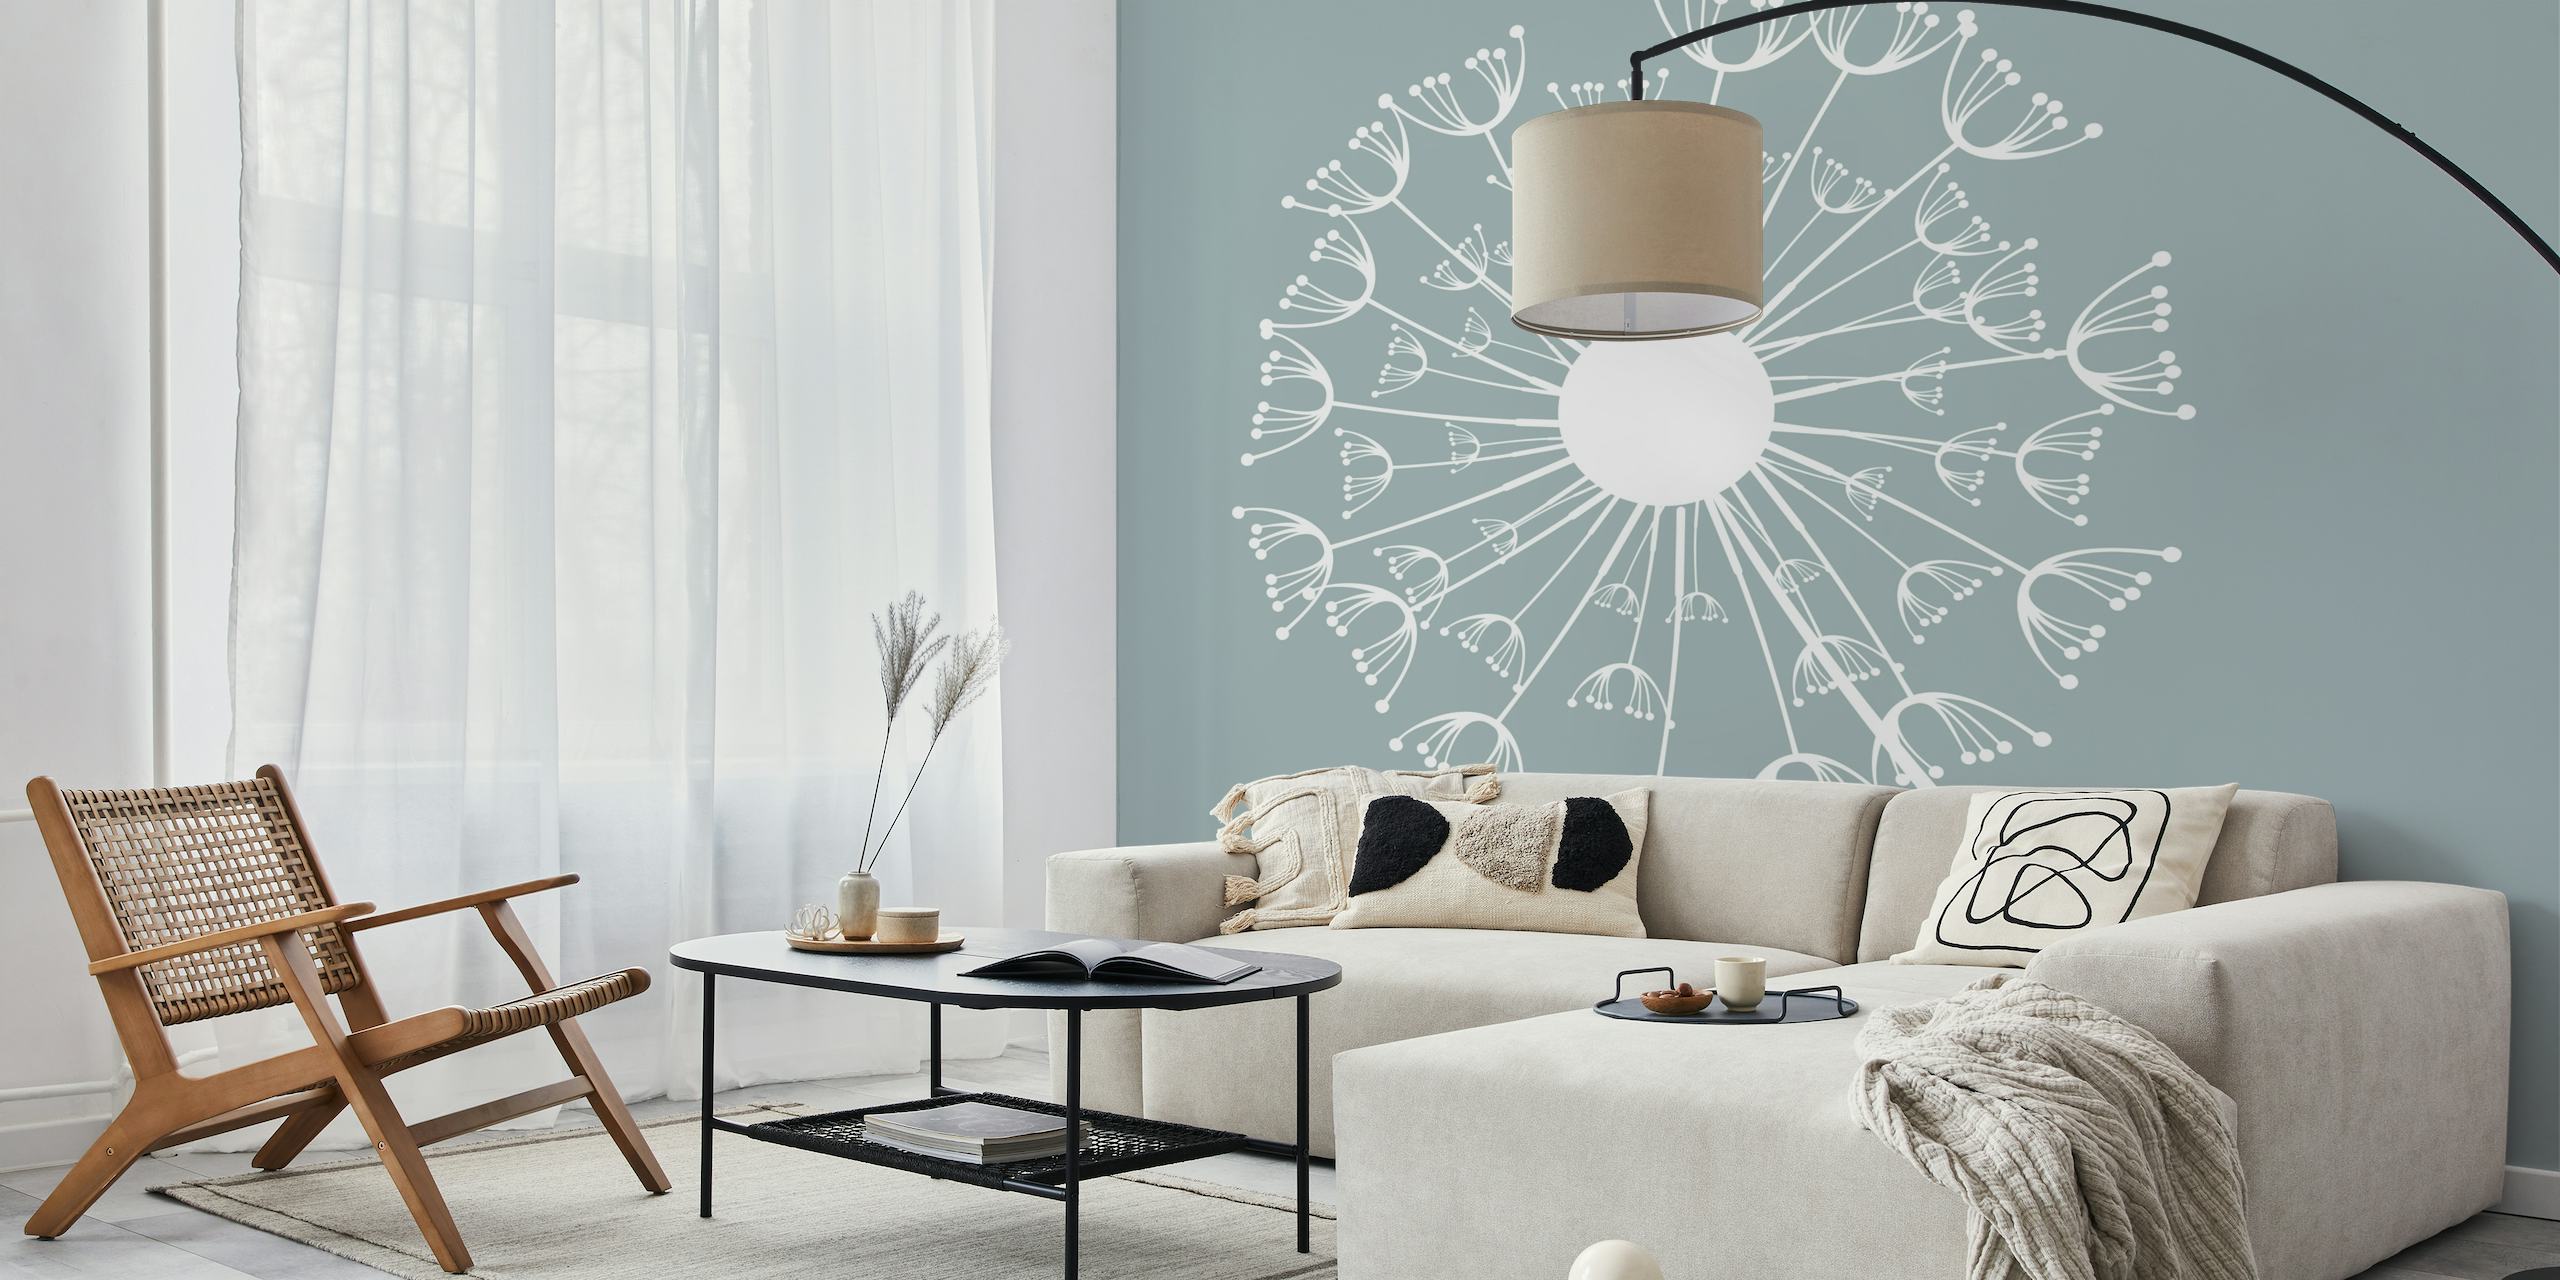 Mint green background with a white dandelion design wall mural